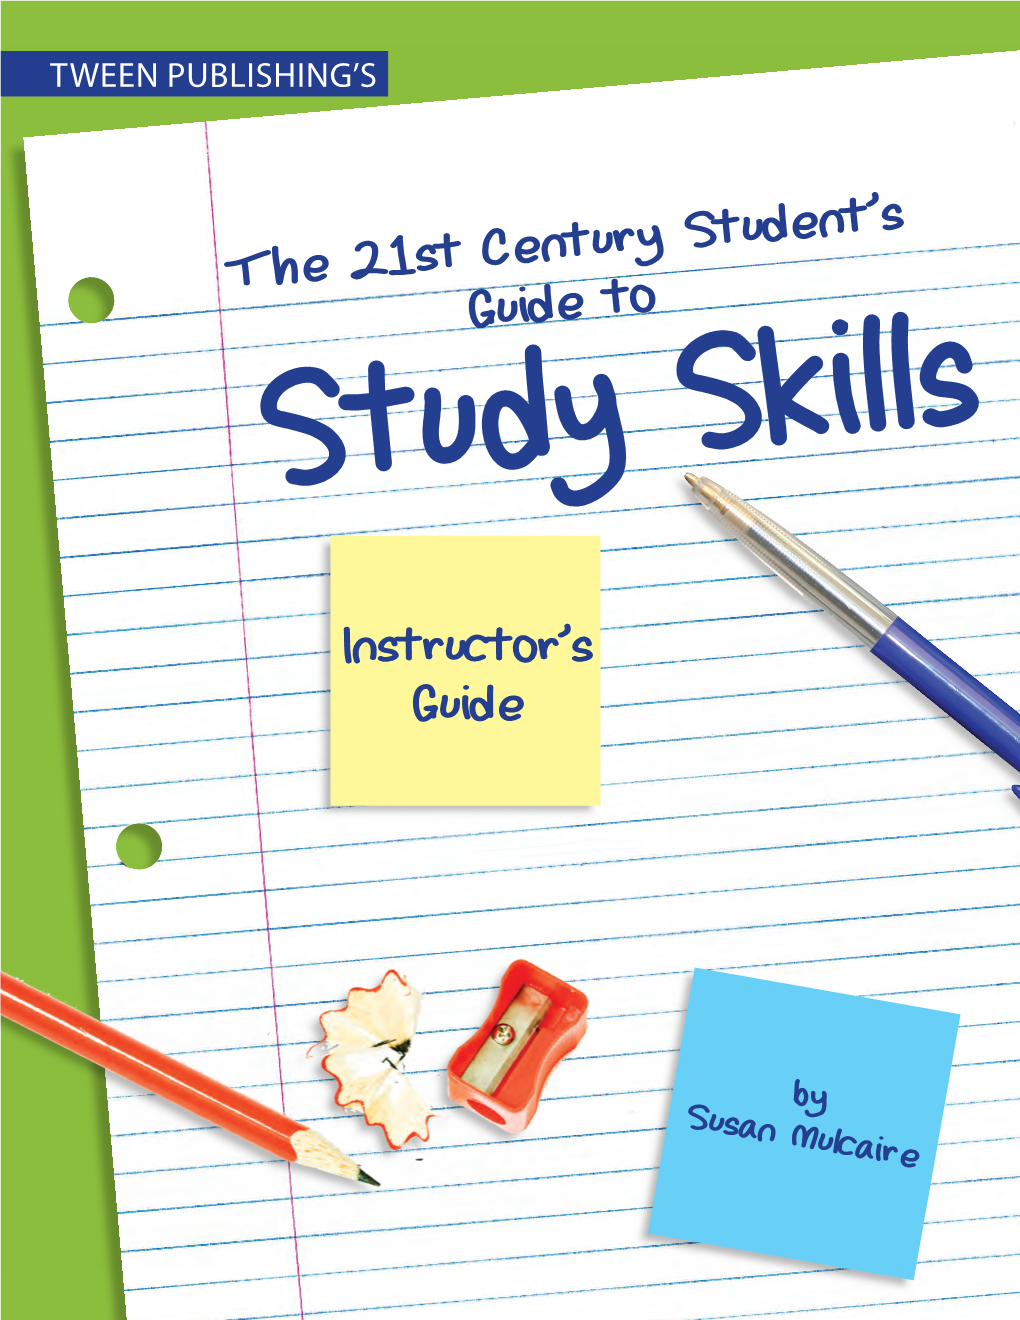 The 21St Century Student's Guide To